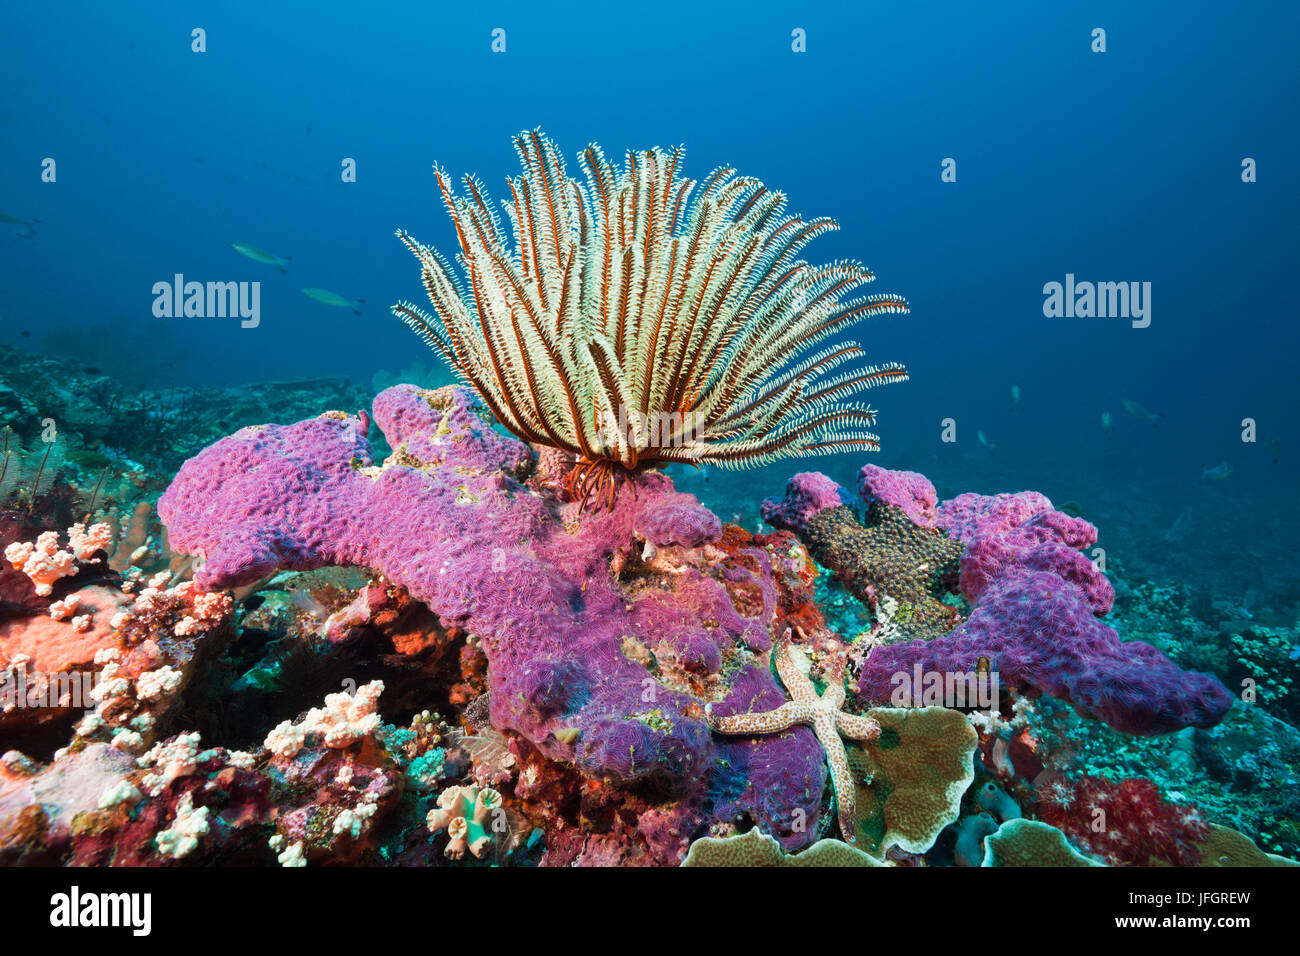 Coral reef with feather star, Florida Islands, the Solomon Islands Stock Photo